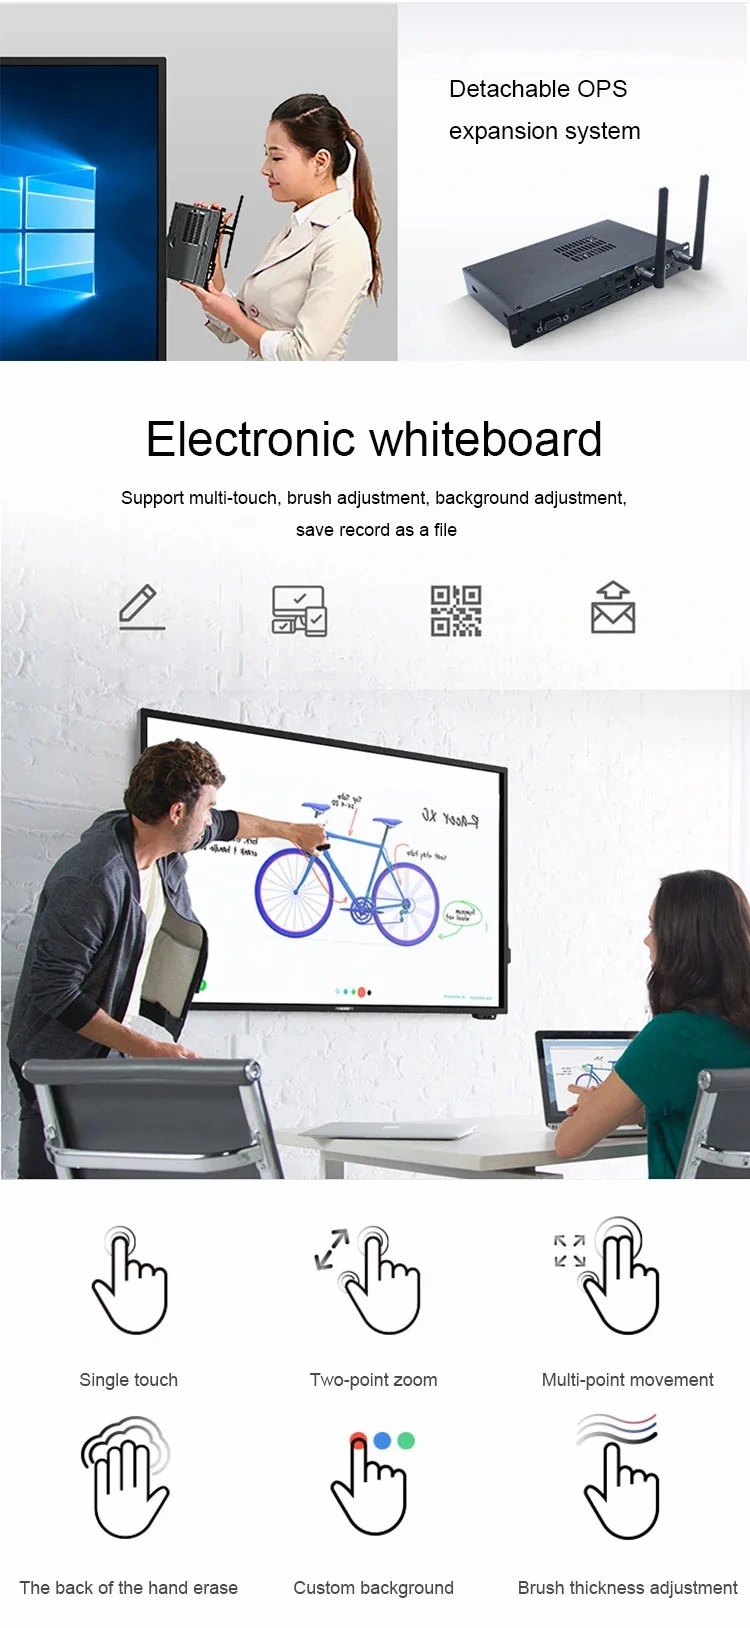 75 Inch Education and Conference Dual System Android Windows Smart LCD Touch Screen Monitor Interactive Whiteboard Device